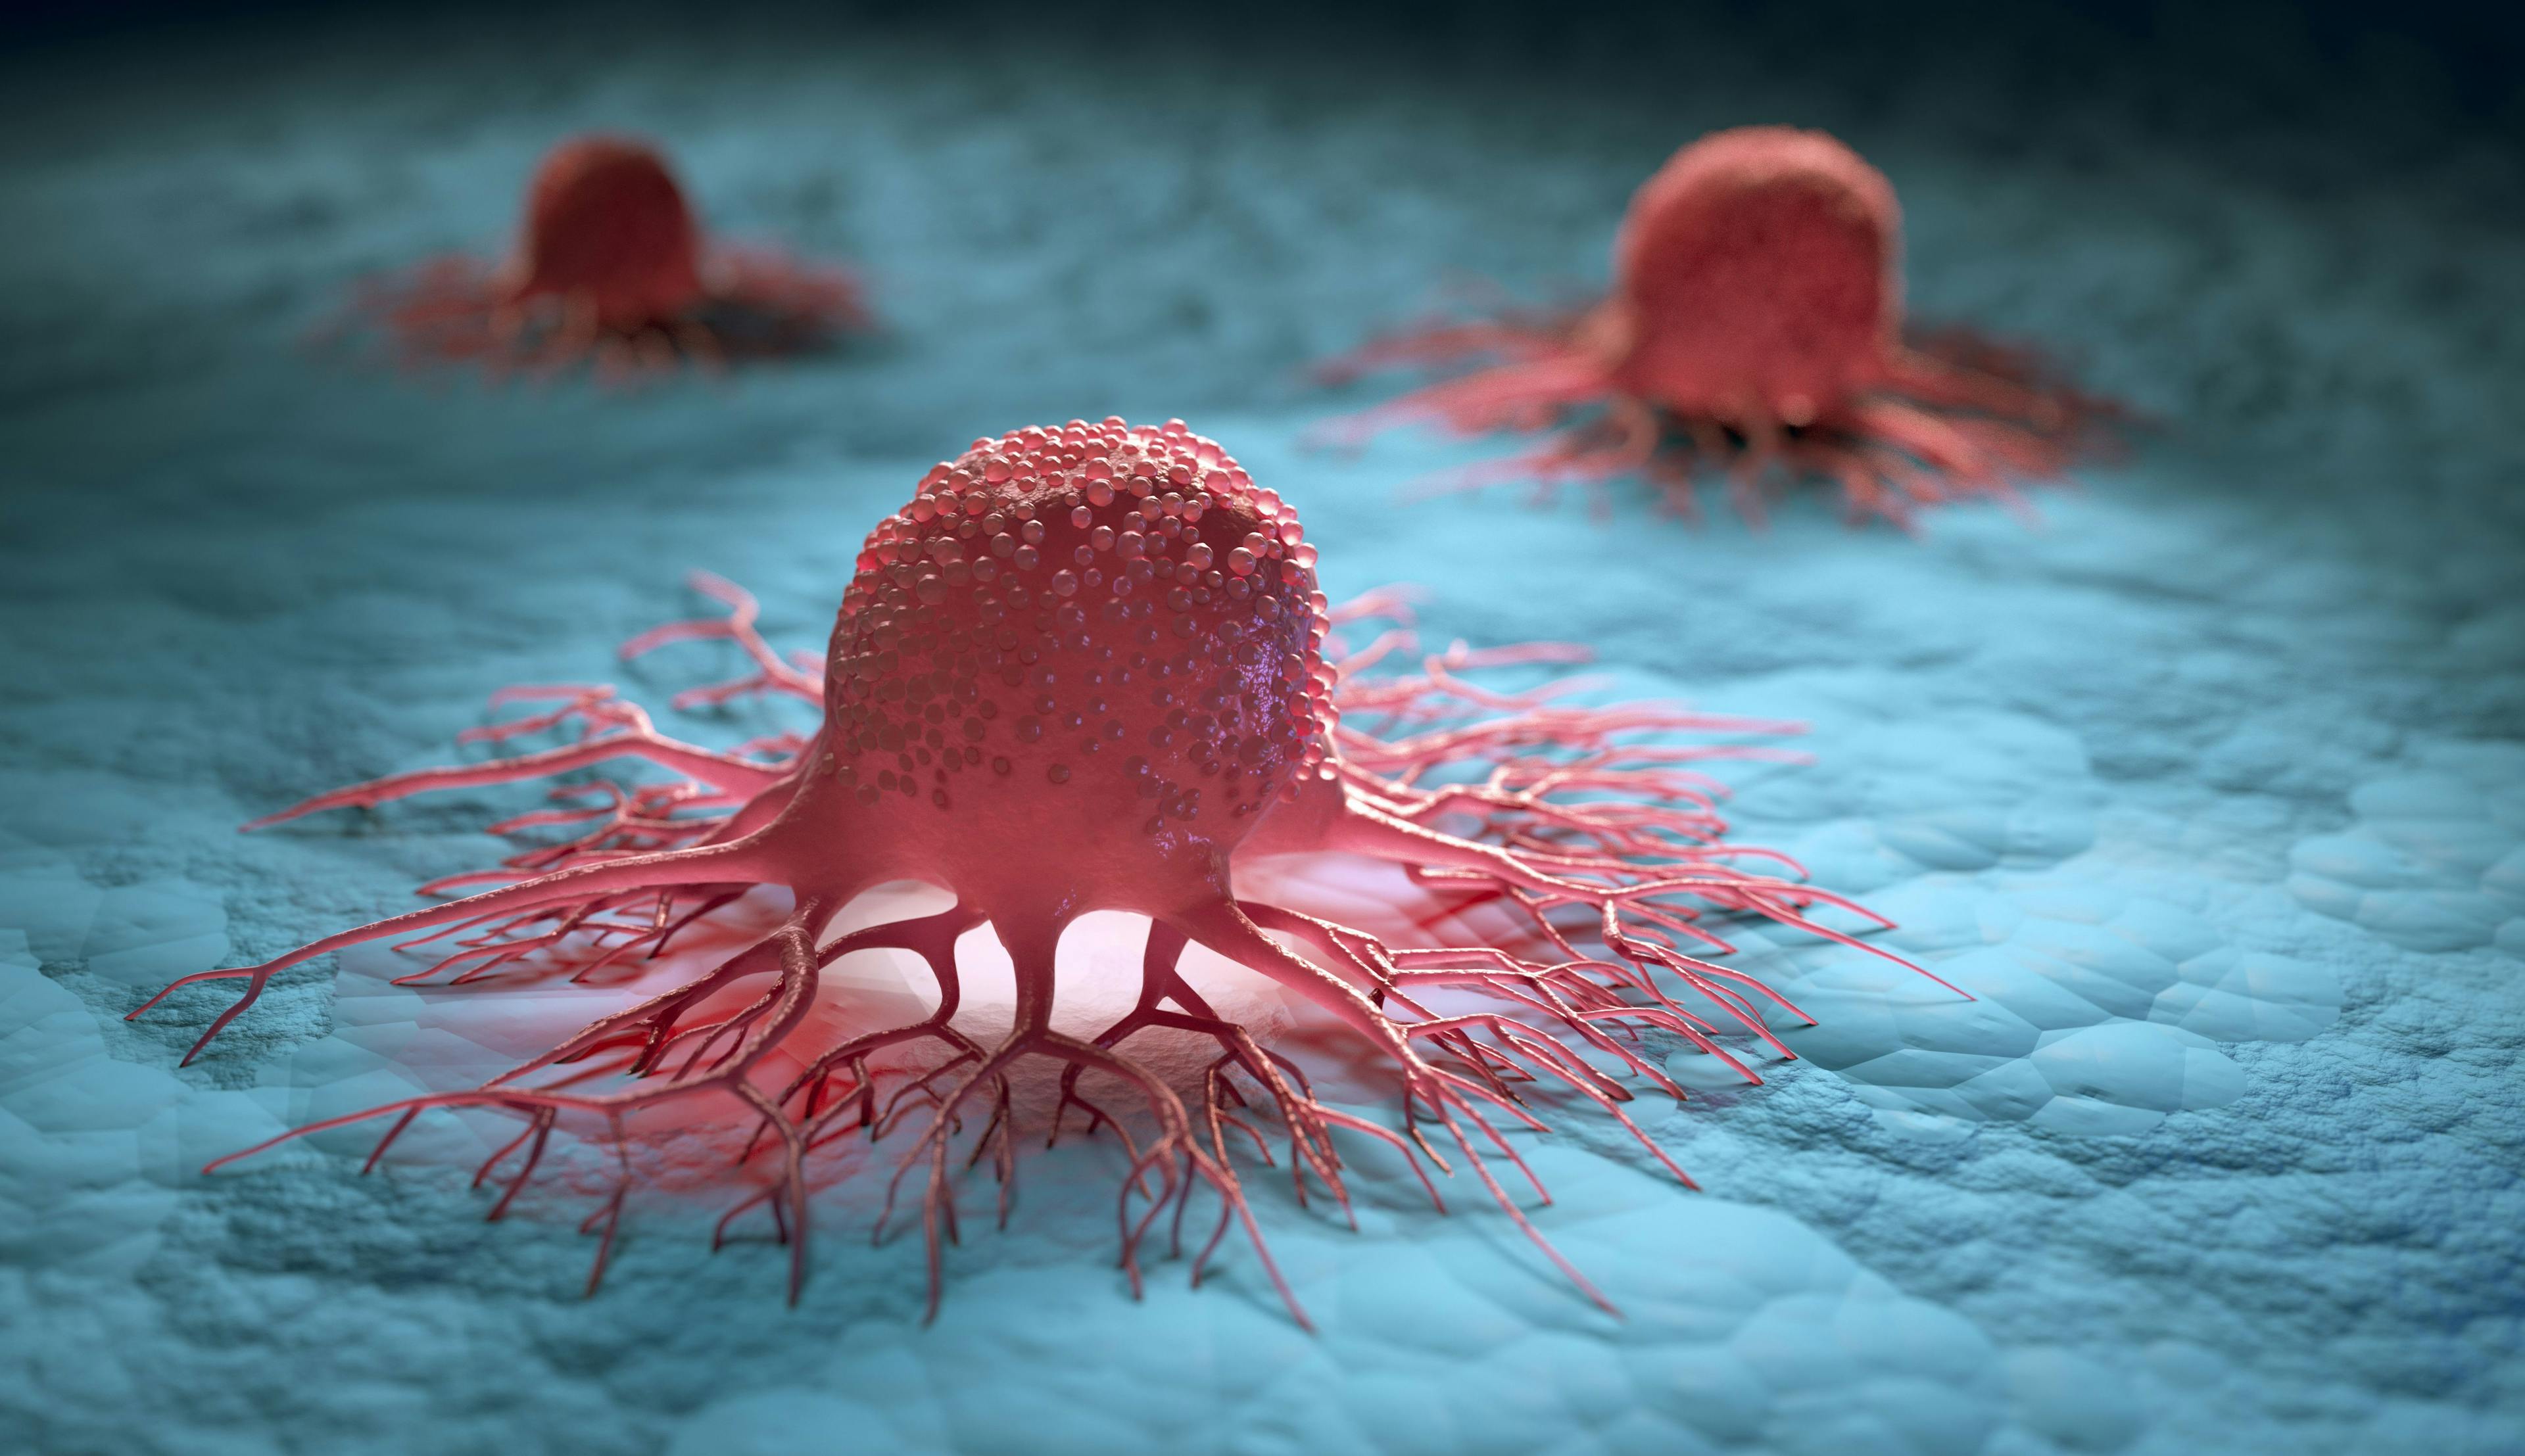 CAR-M/Pembrolizumab Trial Doses First Patient With HER2-Overexpressing Solid Tumors